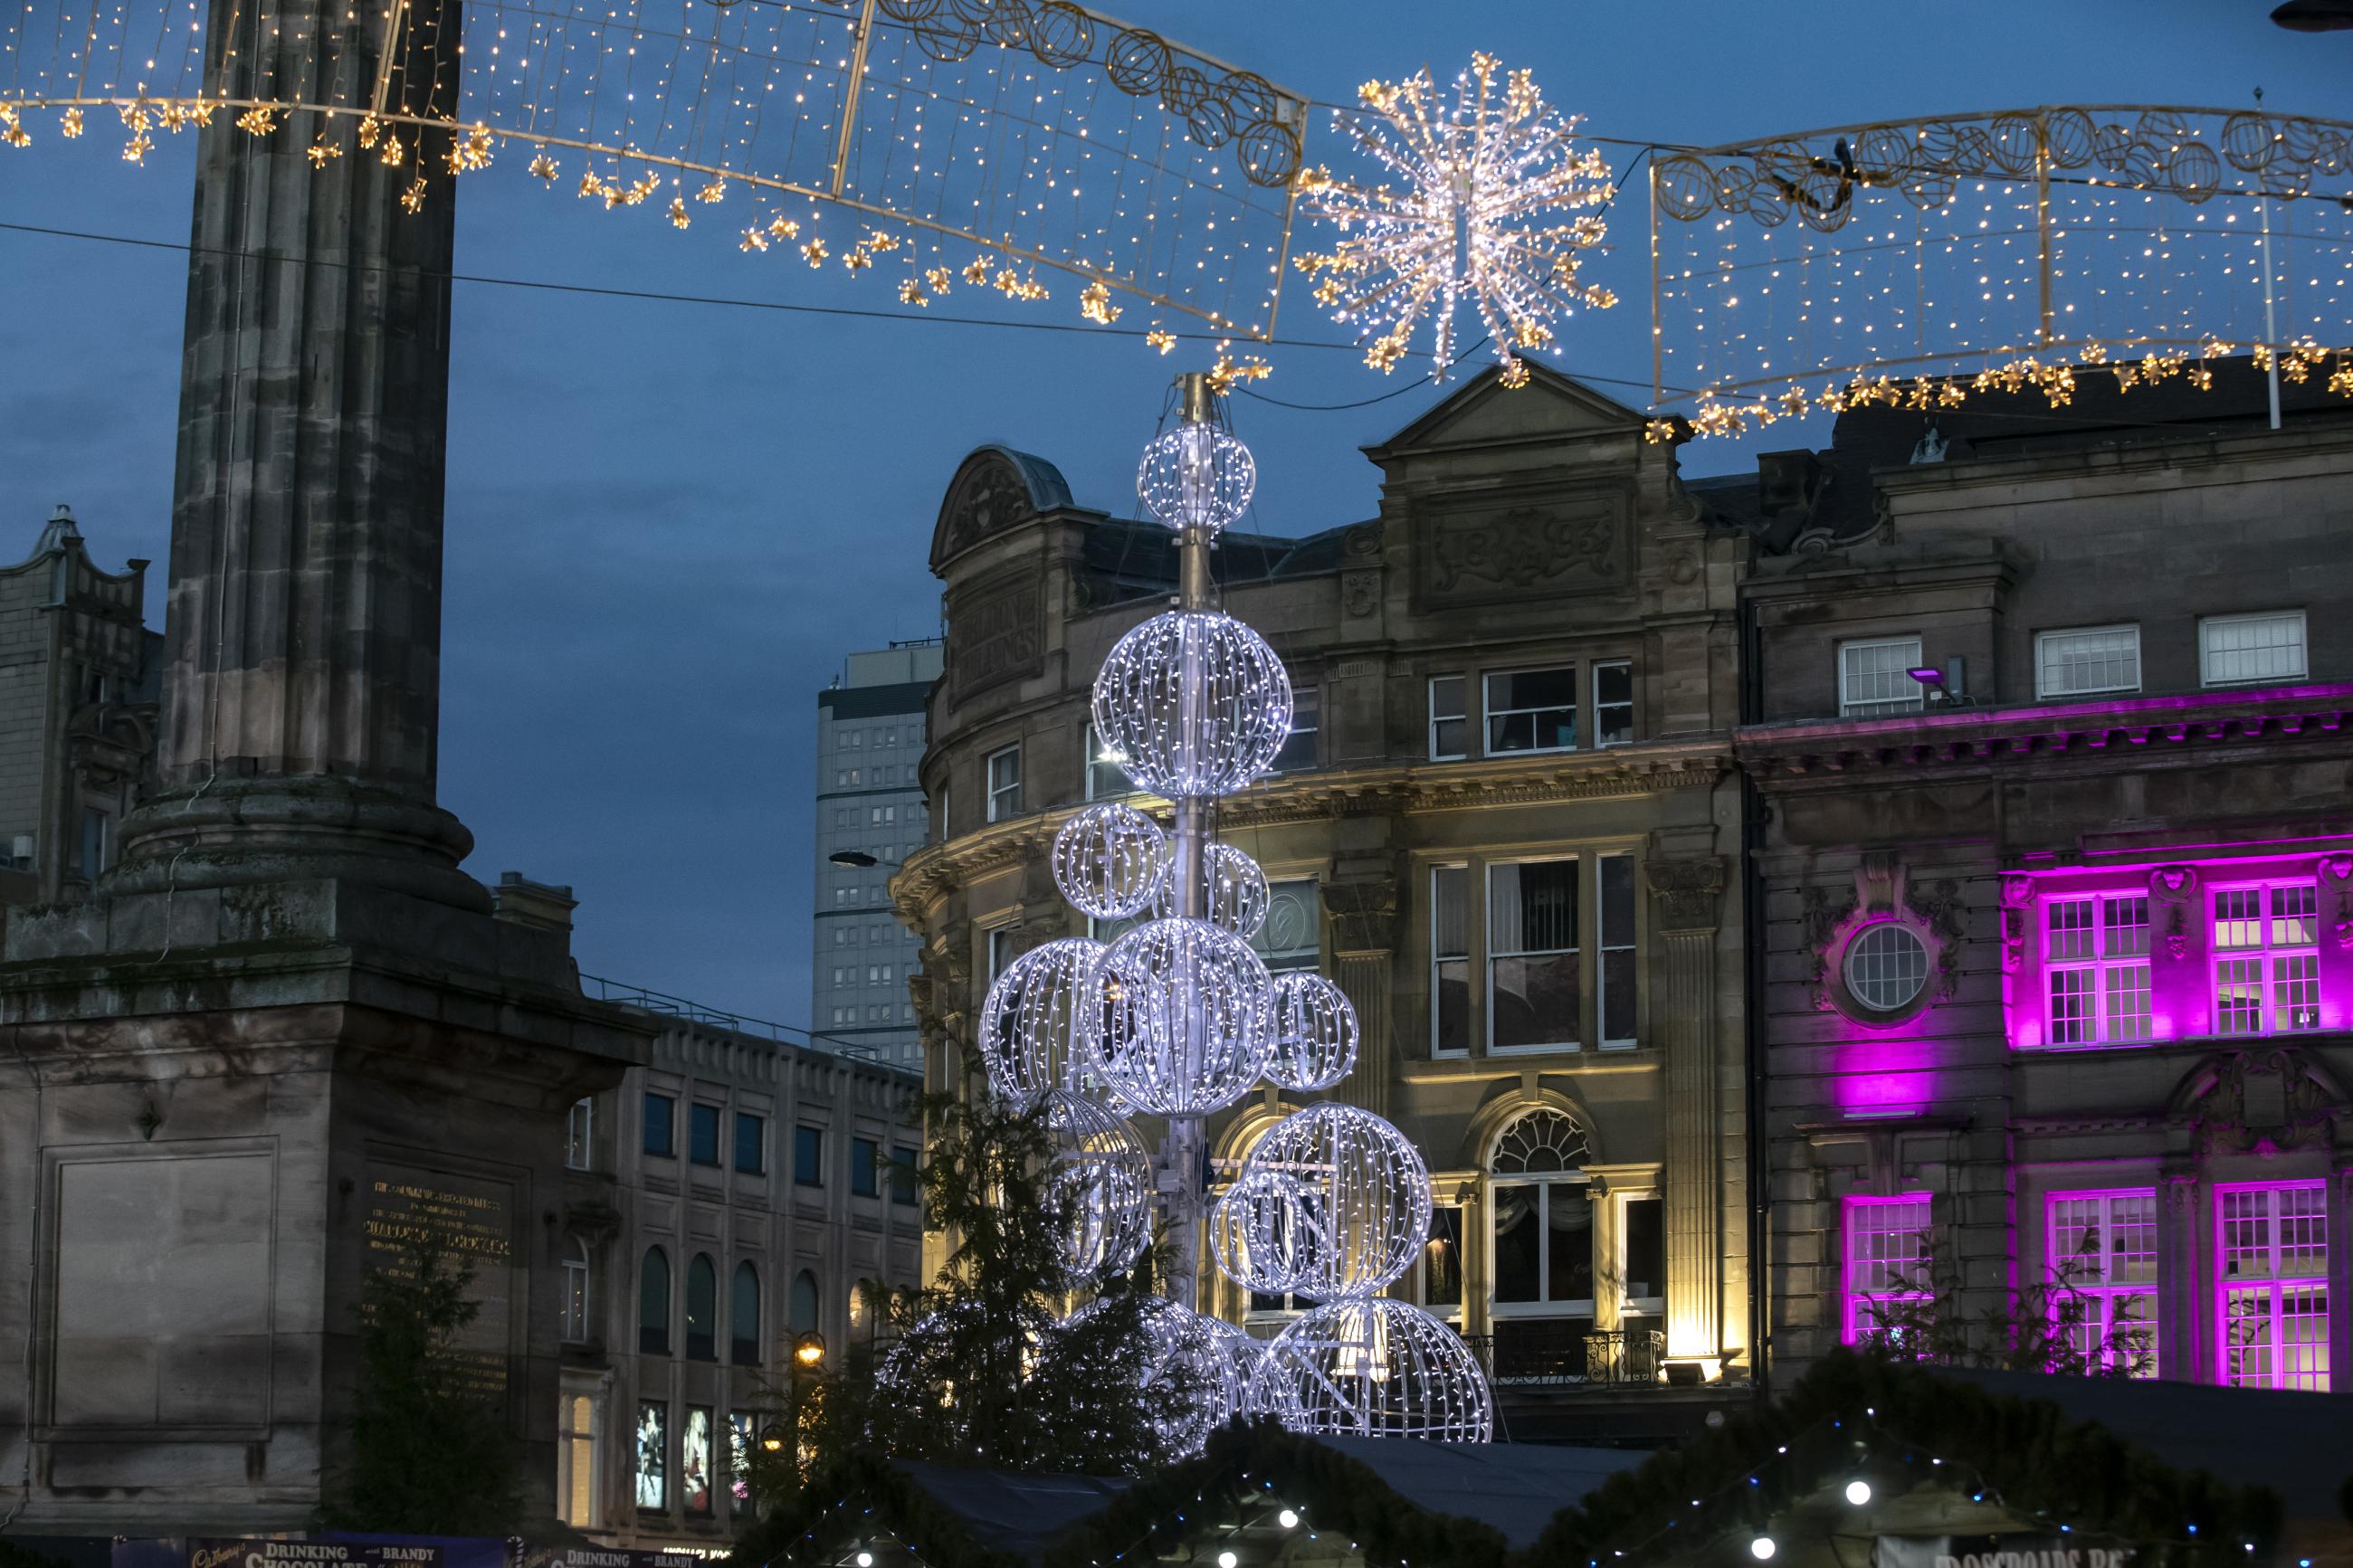 Festive scene and lights at Grey's Monument 